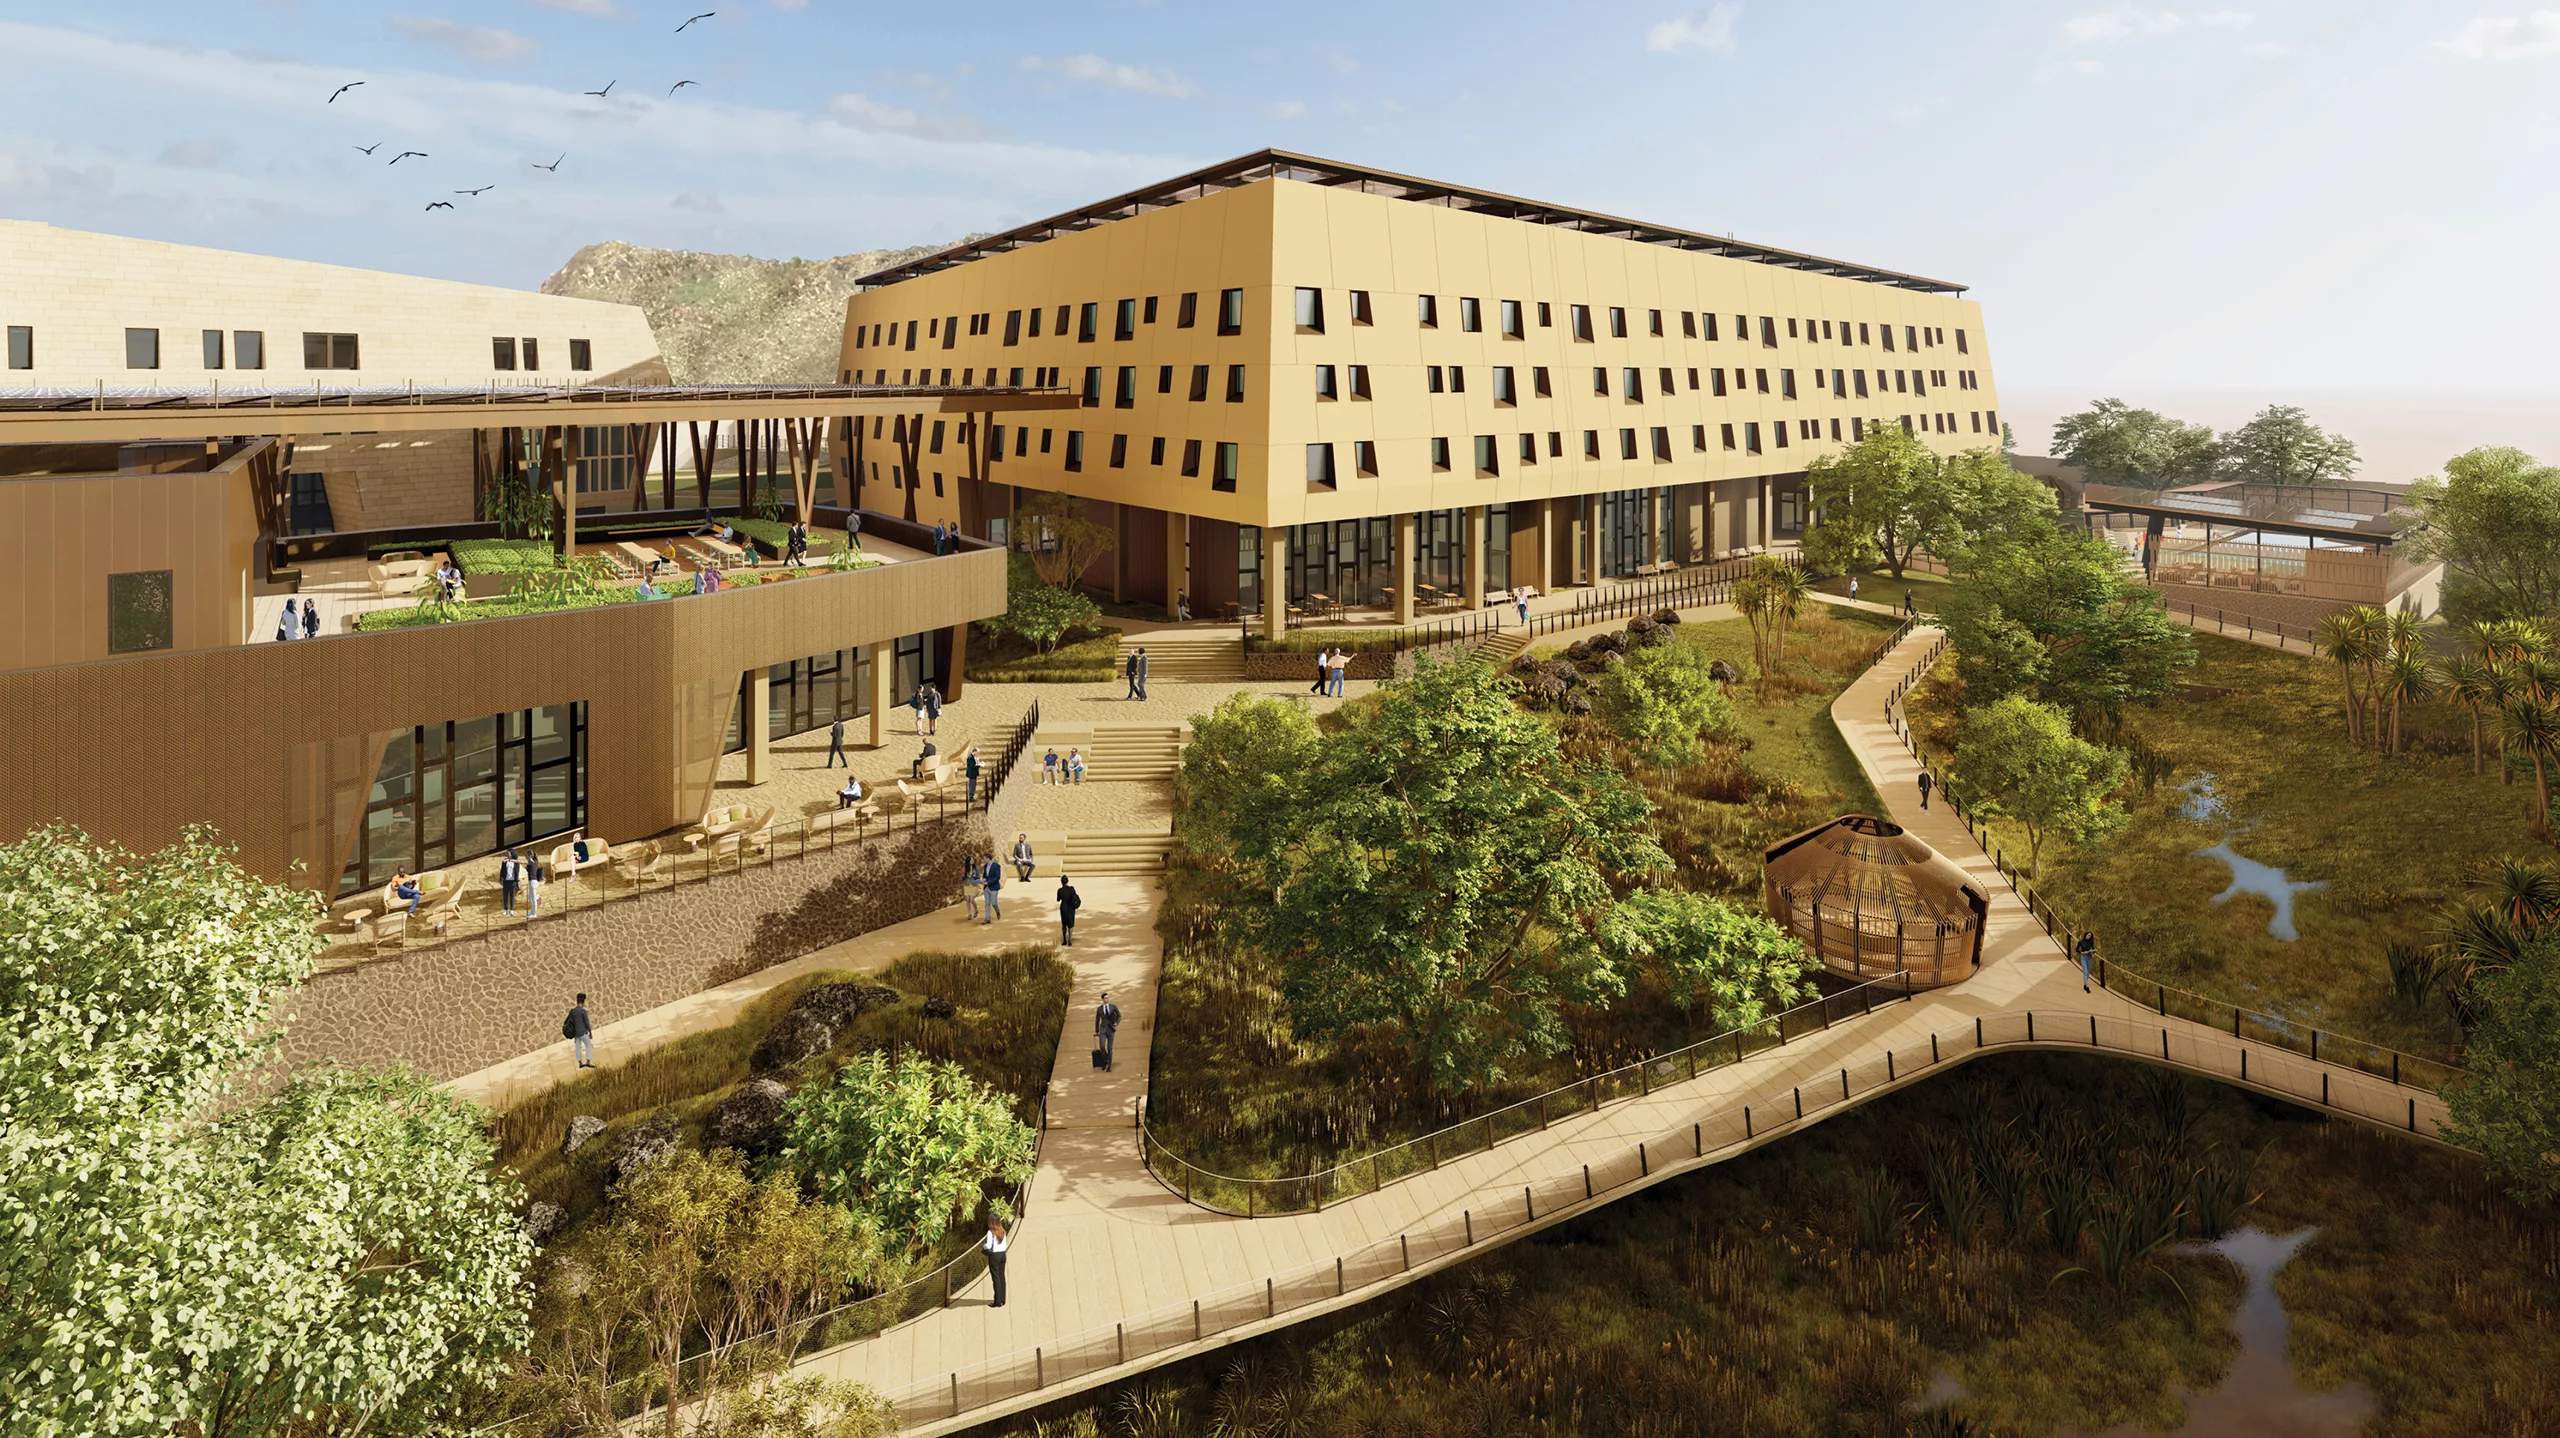 Aerial daylight rendering of the four-story, sandstone-colored U.S. Embassy in Juba surrounded by populated pathways and footbridges, natural landscaping, outdoor seating, and stairs leading to the main entrance